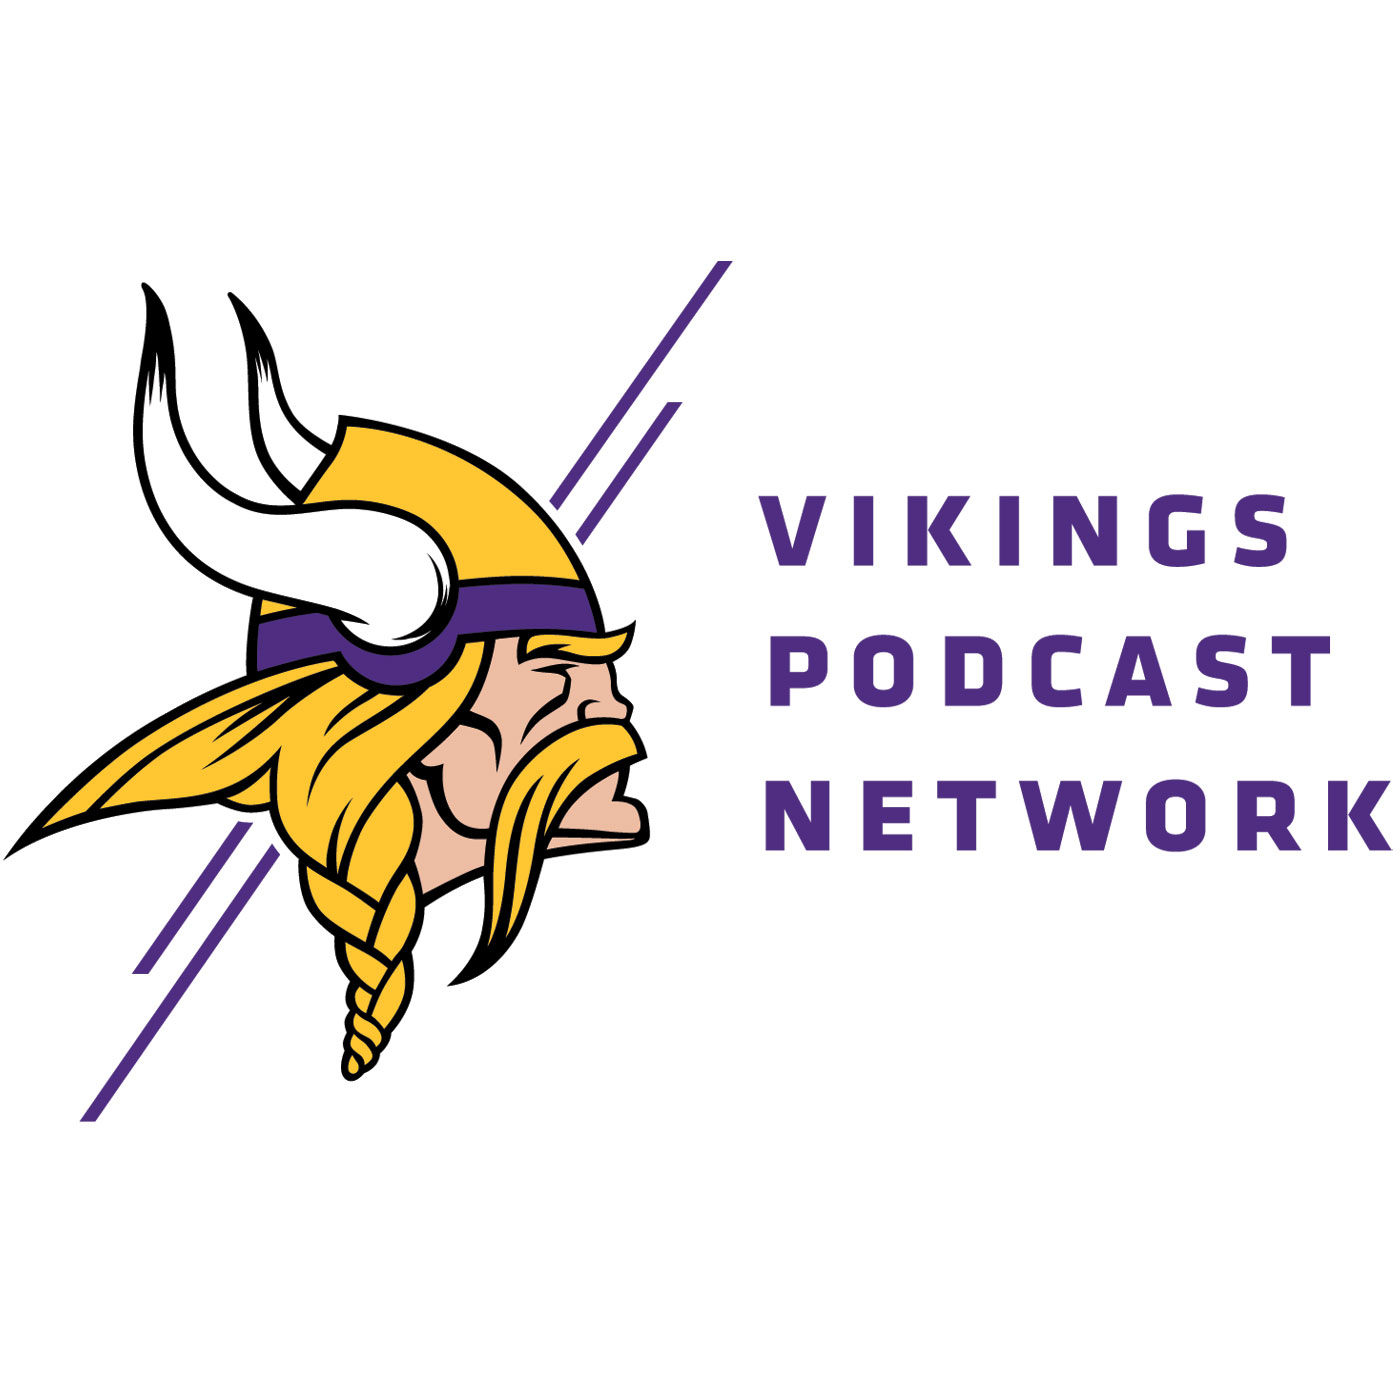 Minnesota Vikings Podcast: Pete Bercich Joins to Review Free Agency Acquisitions + Preview NFL Draft | Episode 87